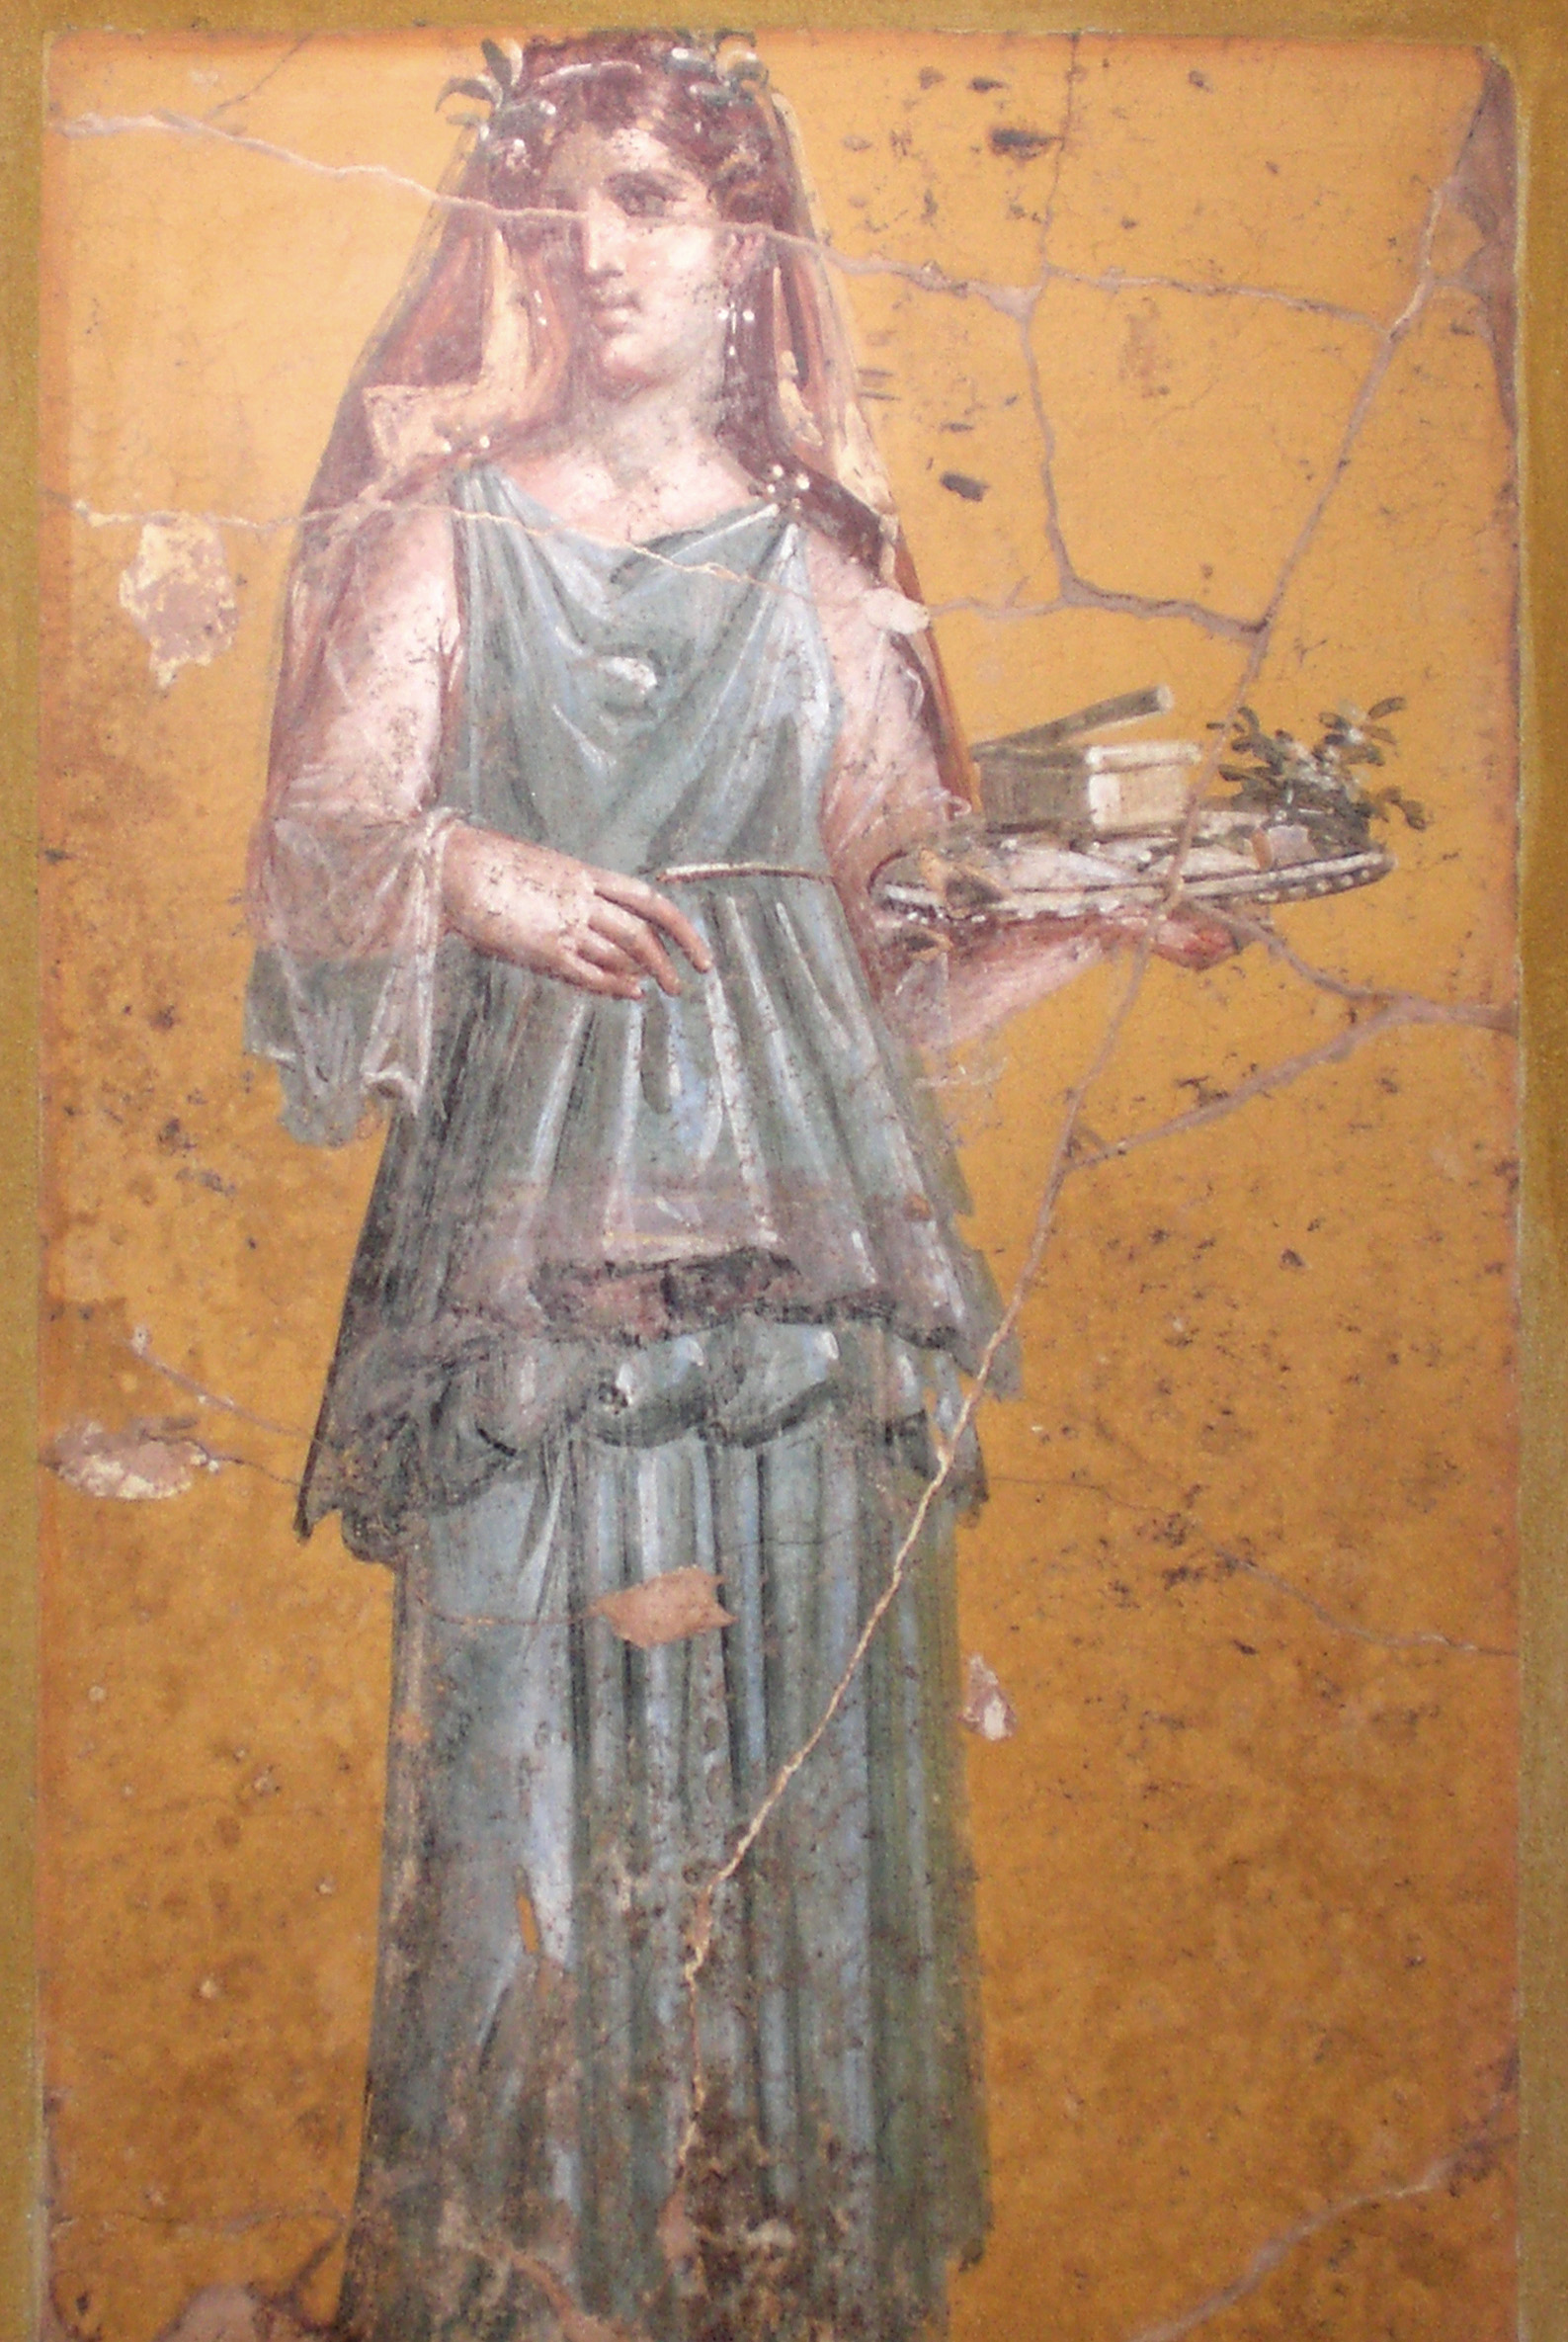 Women in Ancient Rome